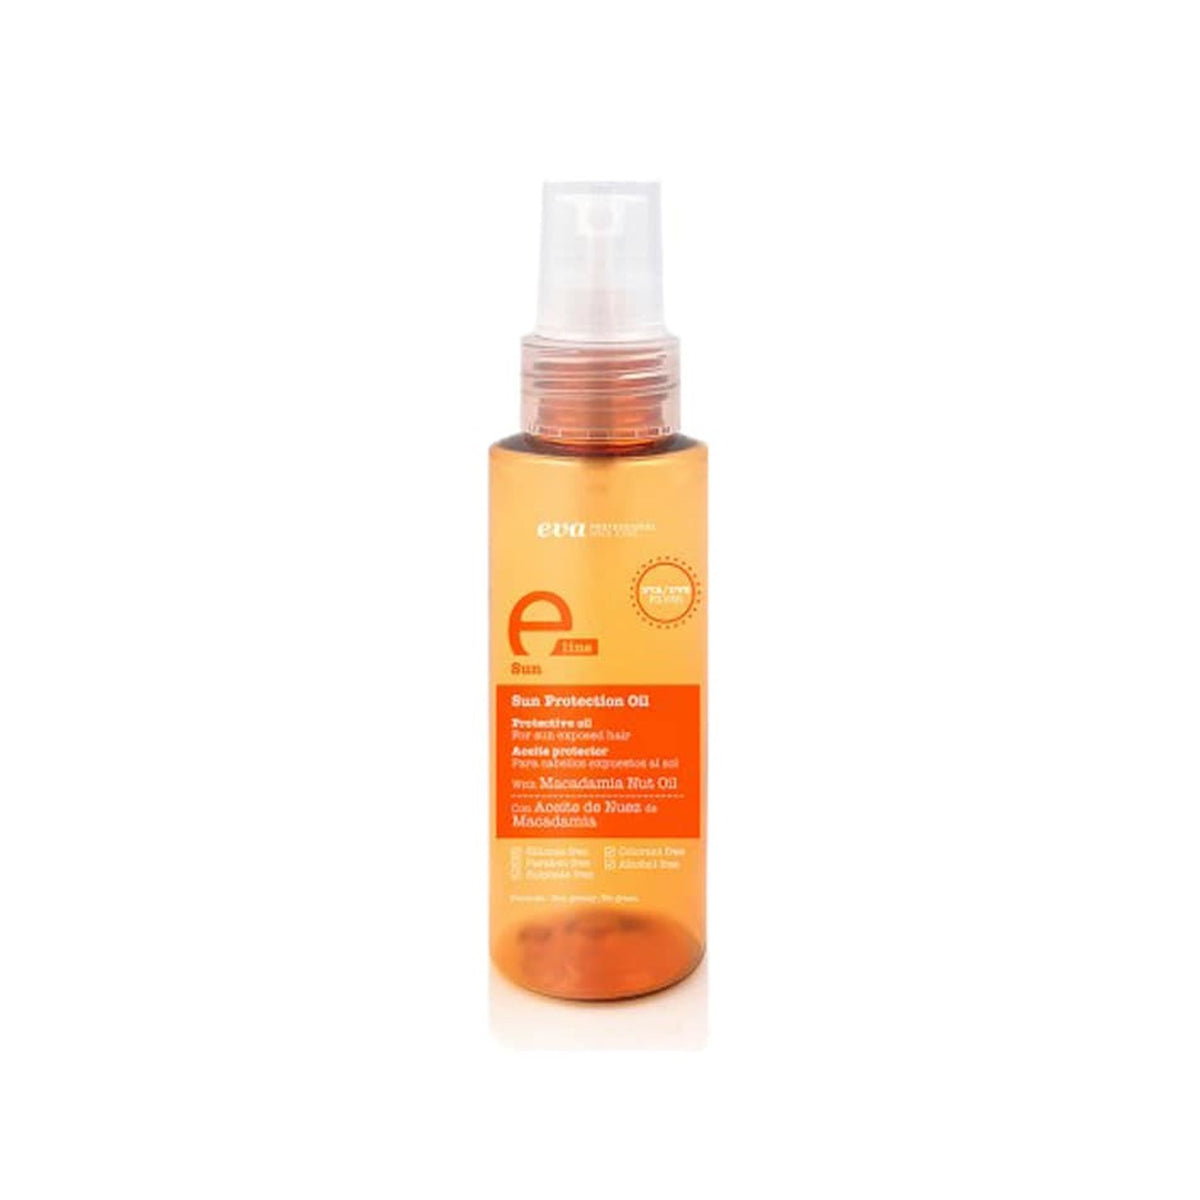 Sun Protection Oil - Haircare Superstore